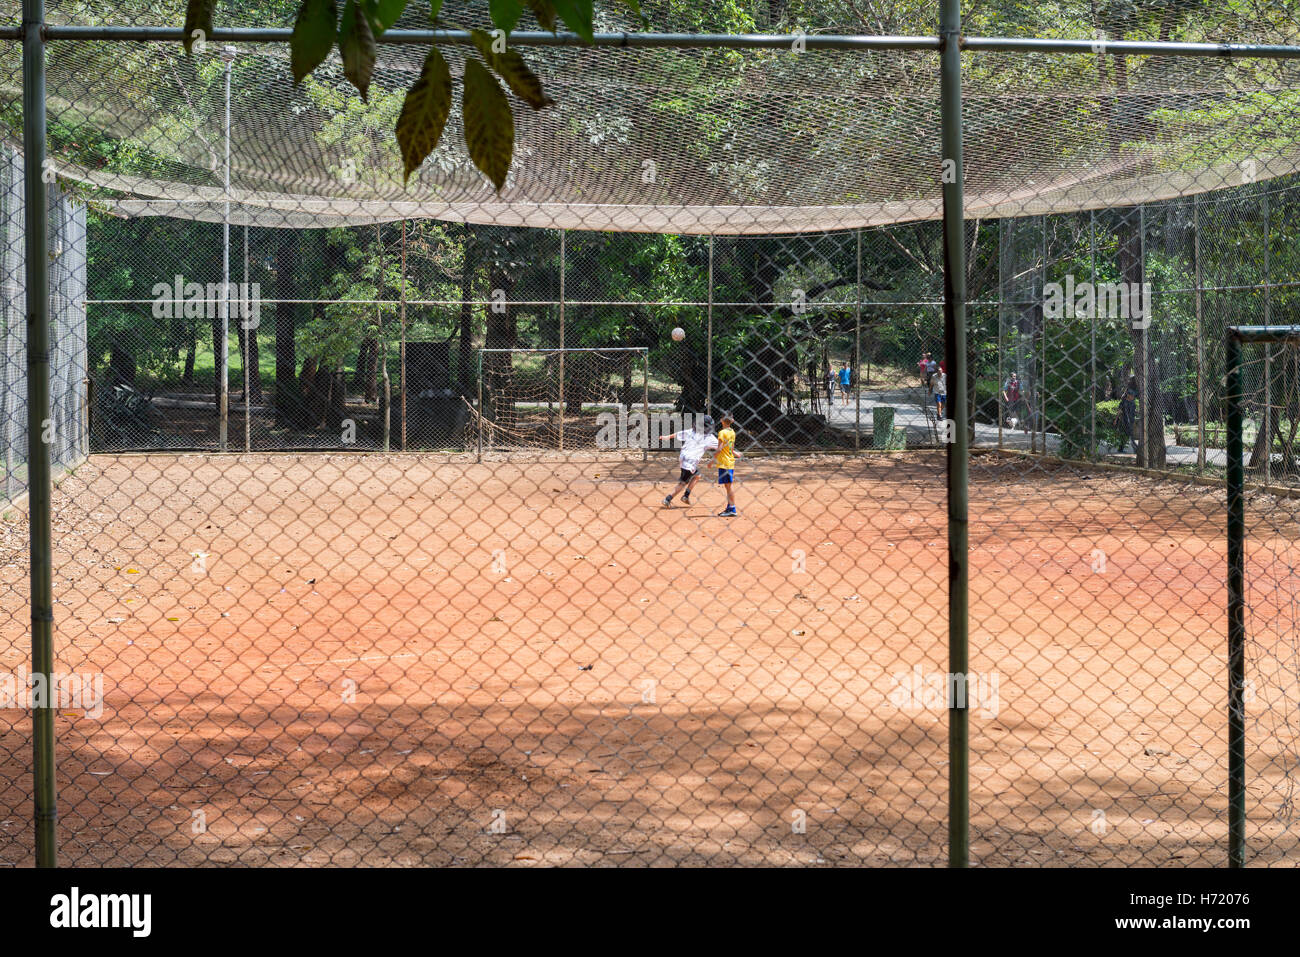 Sao Paulo, Brazil - October 15 2016: Kids playing football at the Aclimacao Park in Sao Paulo, Brazil. Stock Photo